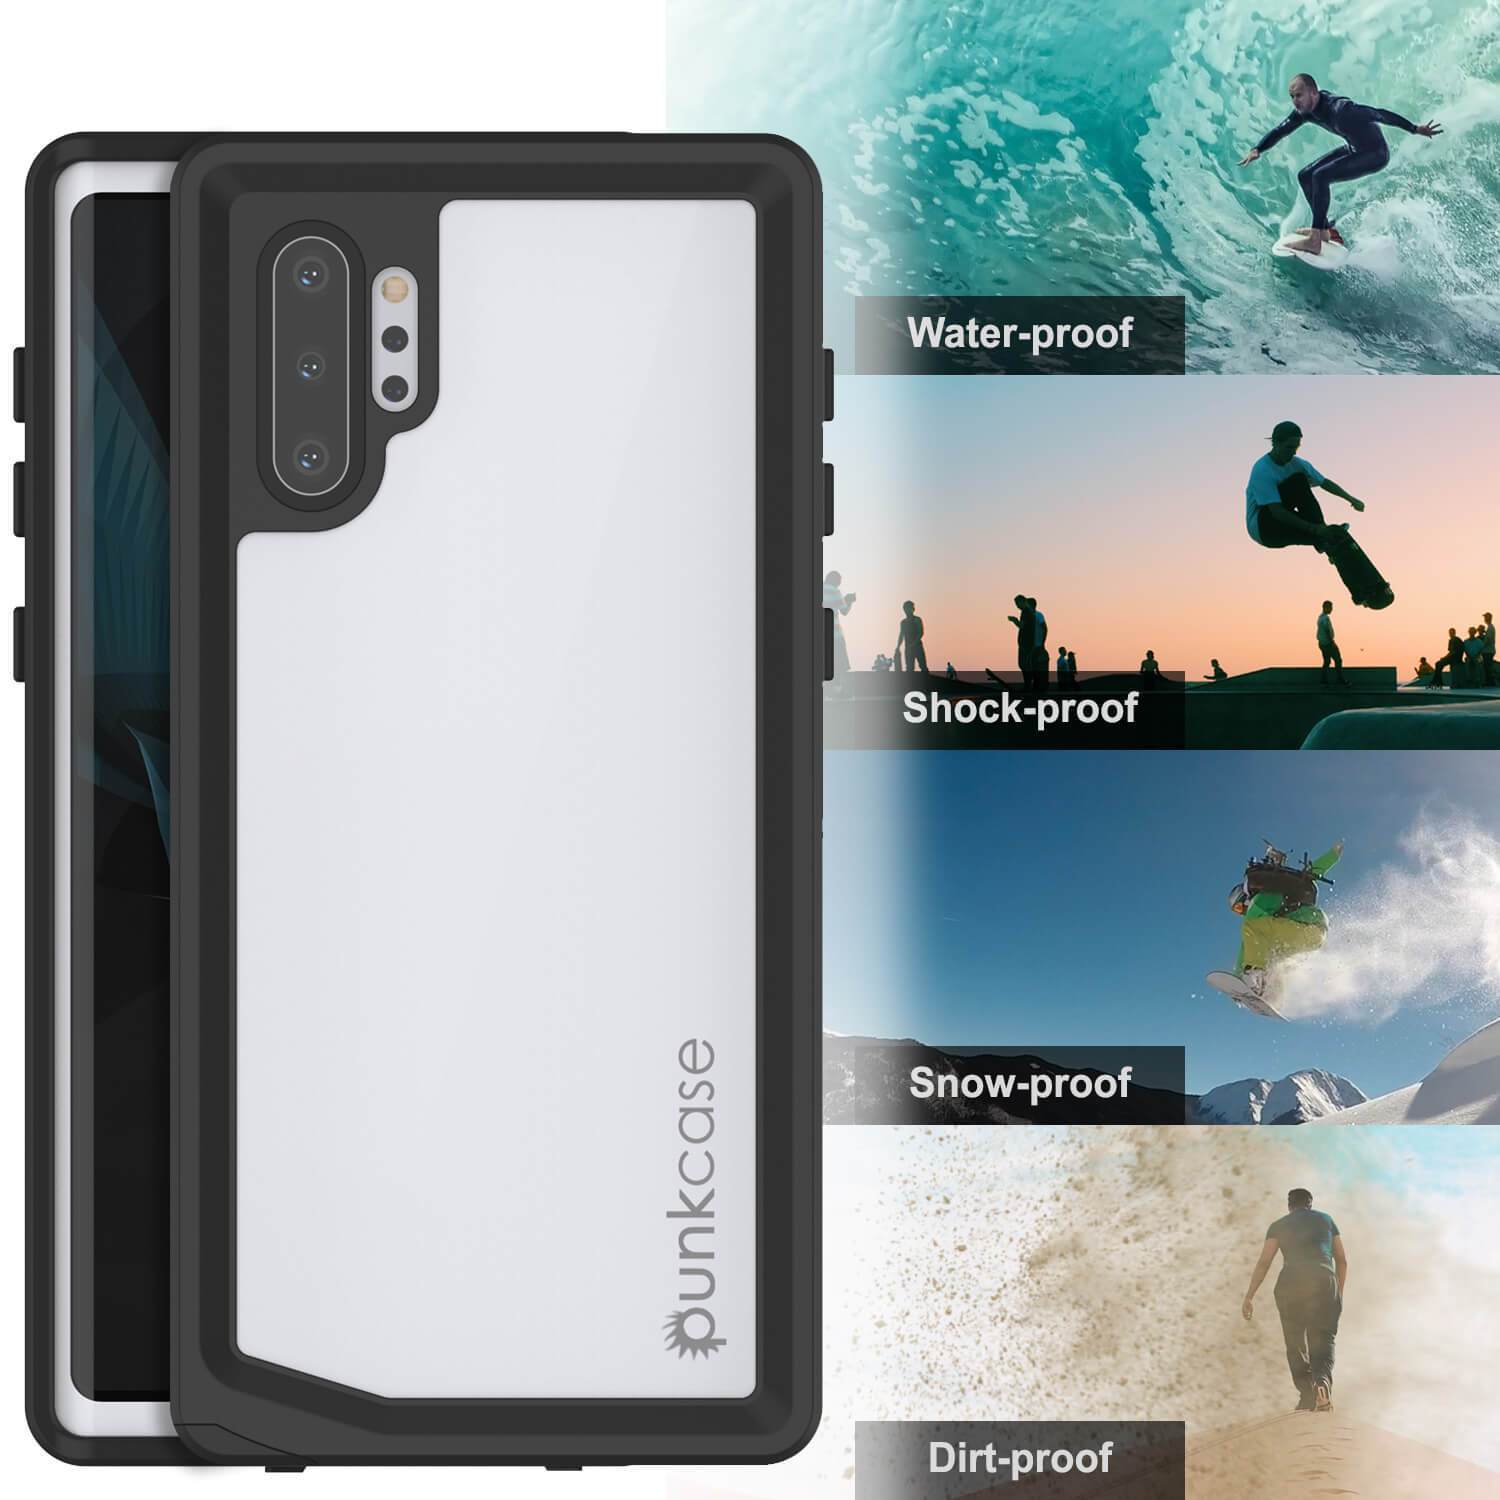 Galaxy Note 10+ Plus Waterproof Case, Punkcase Studstar White Thin Armor Cover